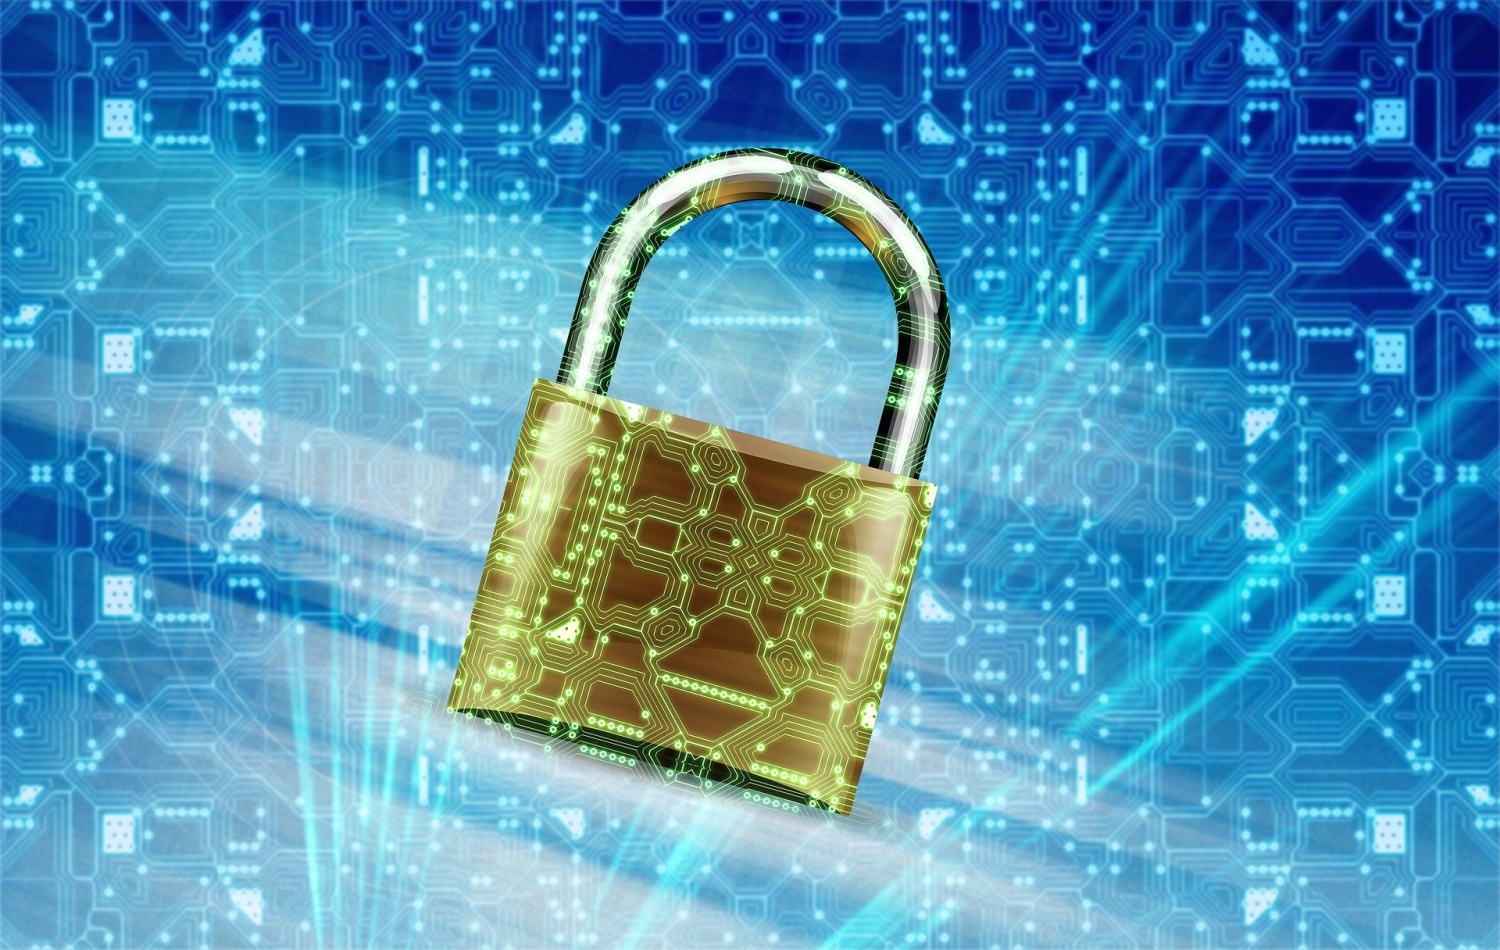 How to Reliably Safeguard the Enterprise Cloud Systems Against New Cyber-Attacks